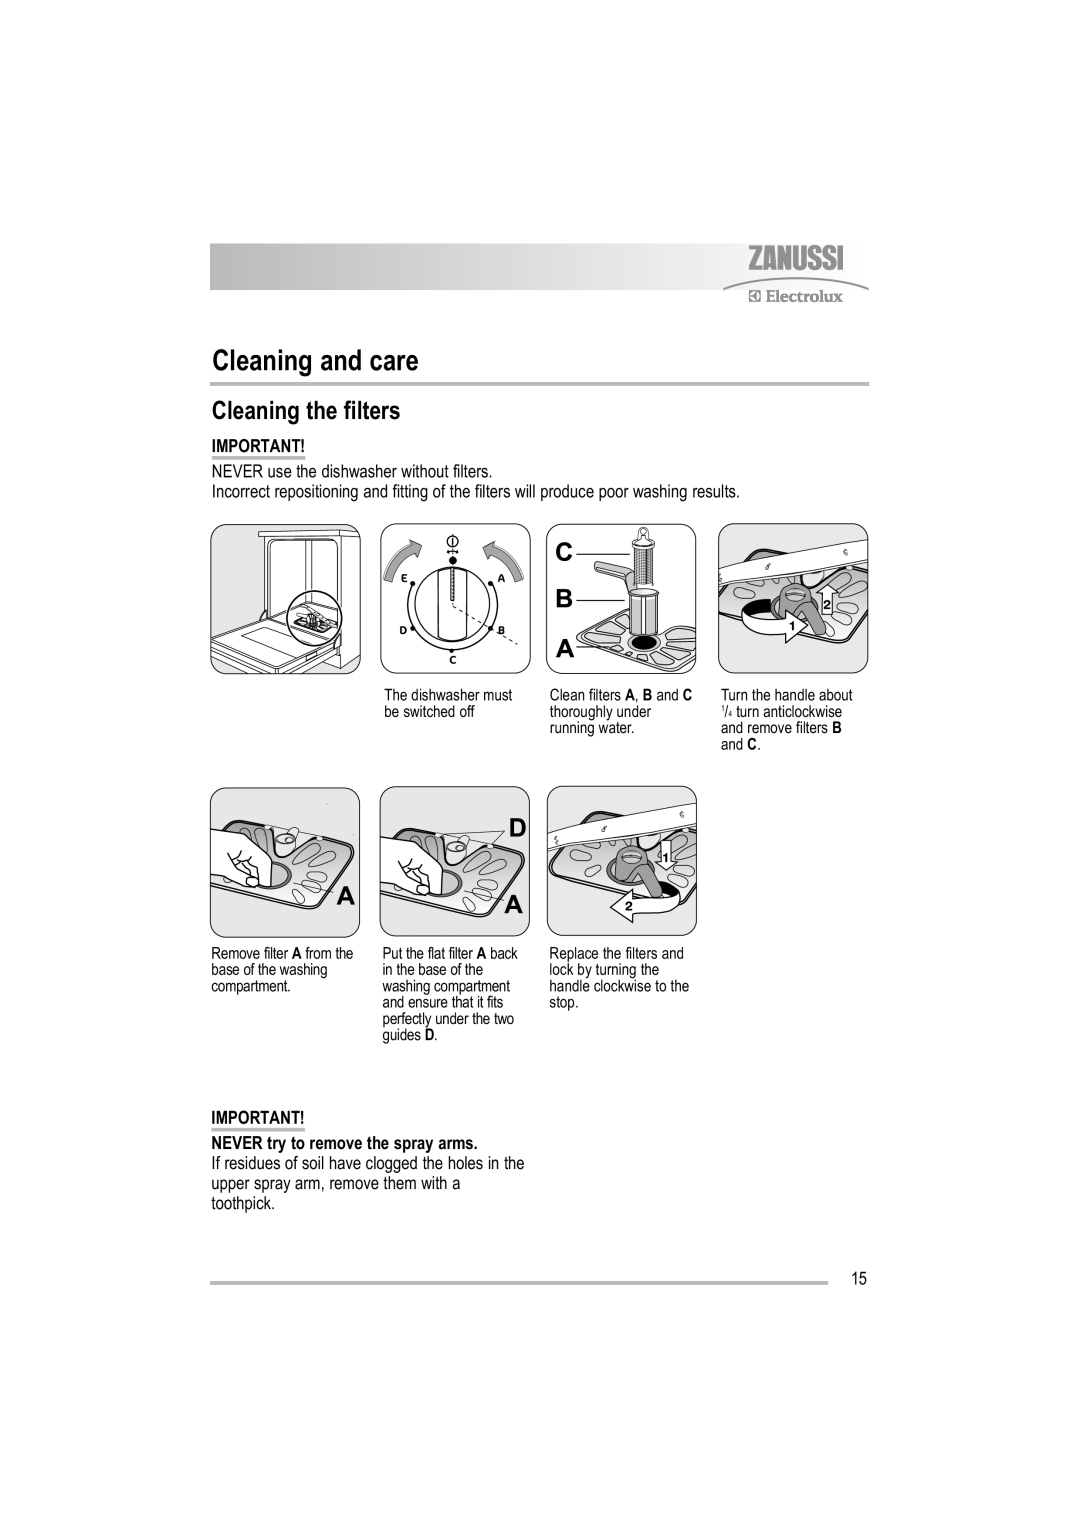 Zanussi ZDF 221 user manual Cleaning and care, Cleaning the filters, NEVER try to remove the spray arms 